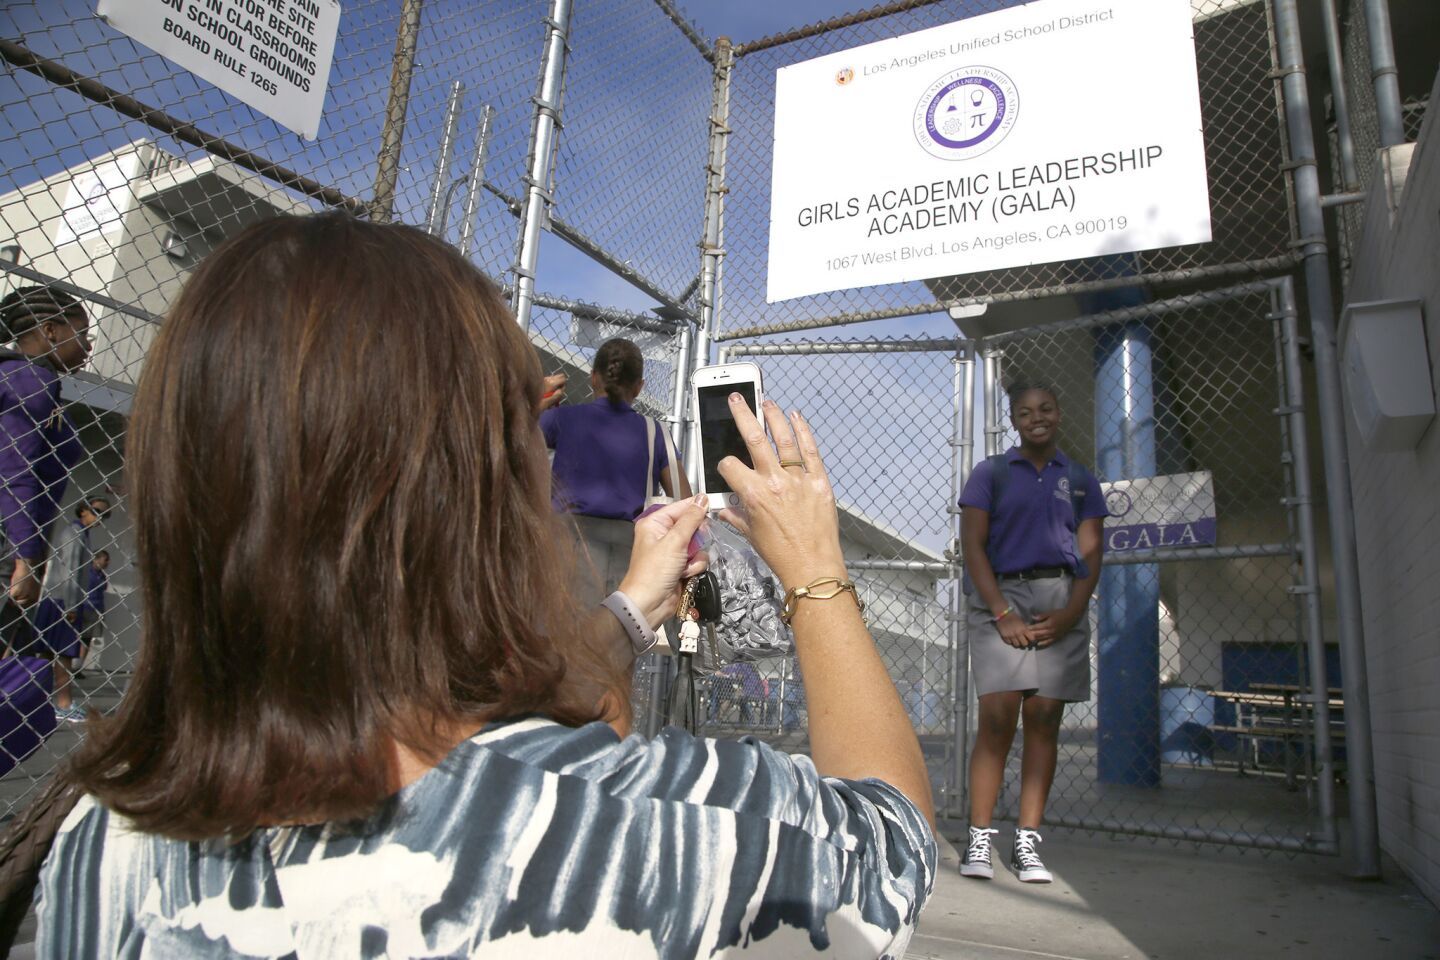 Lots of photos are taken at the front gates of the academy. The school is housed at Los Angeles High in Mid-Wilshire.